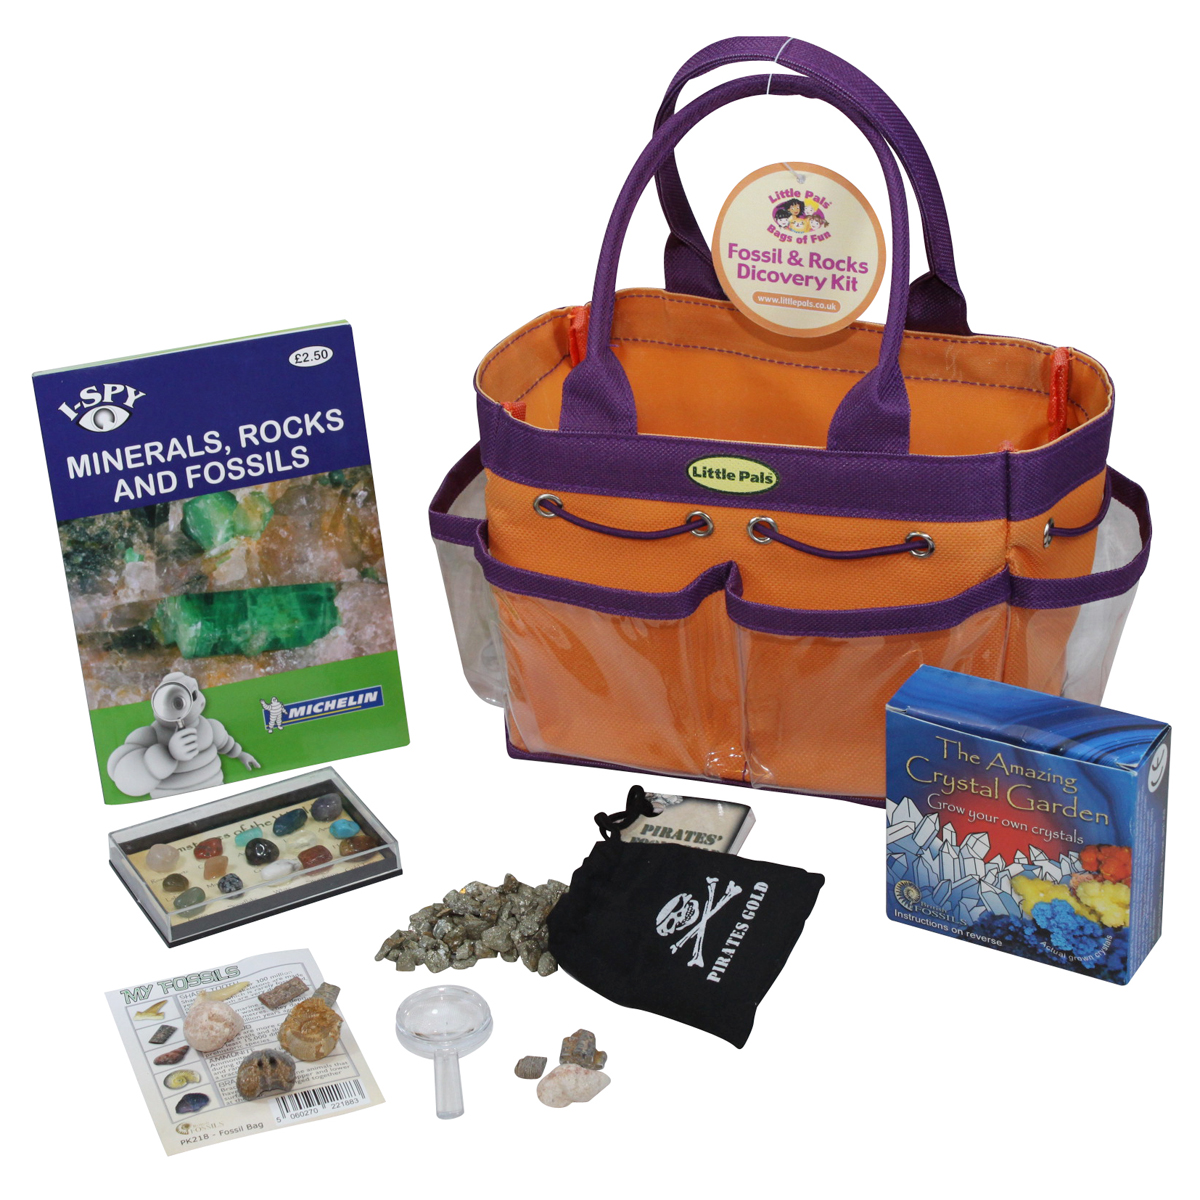 Fossil and Rocks Discovery Kit